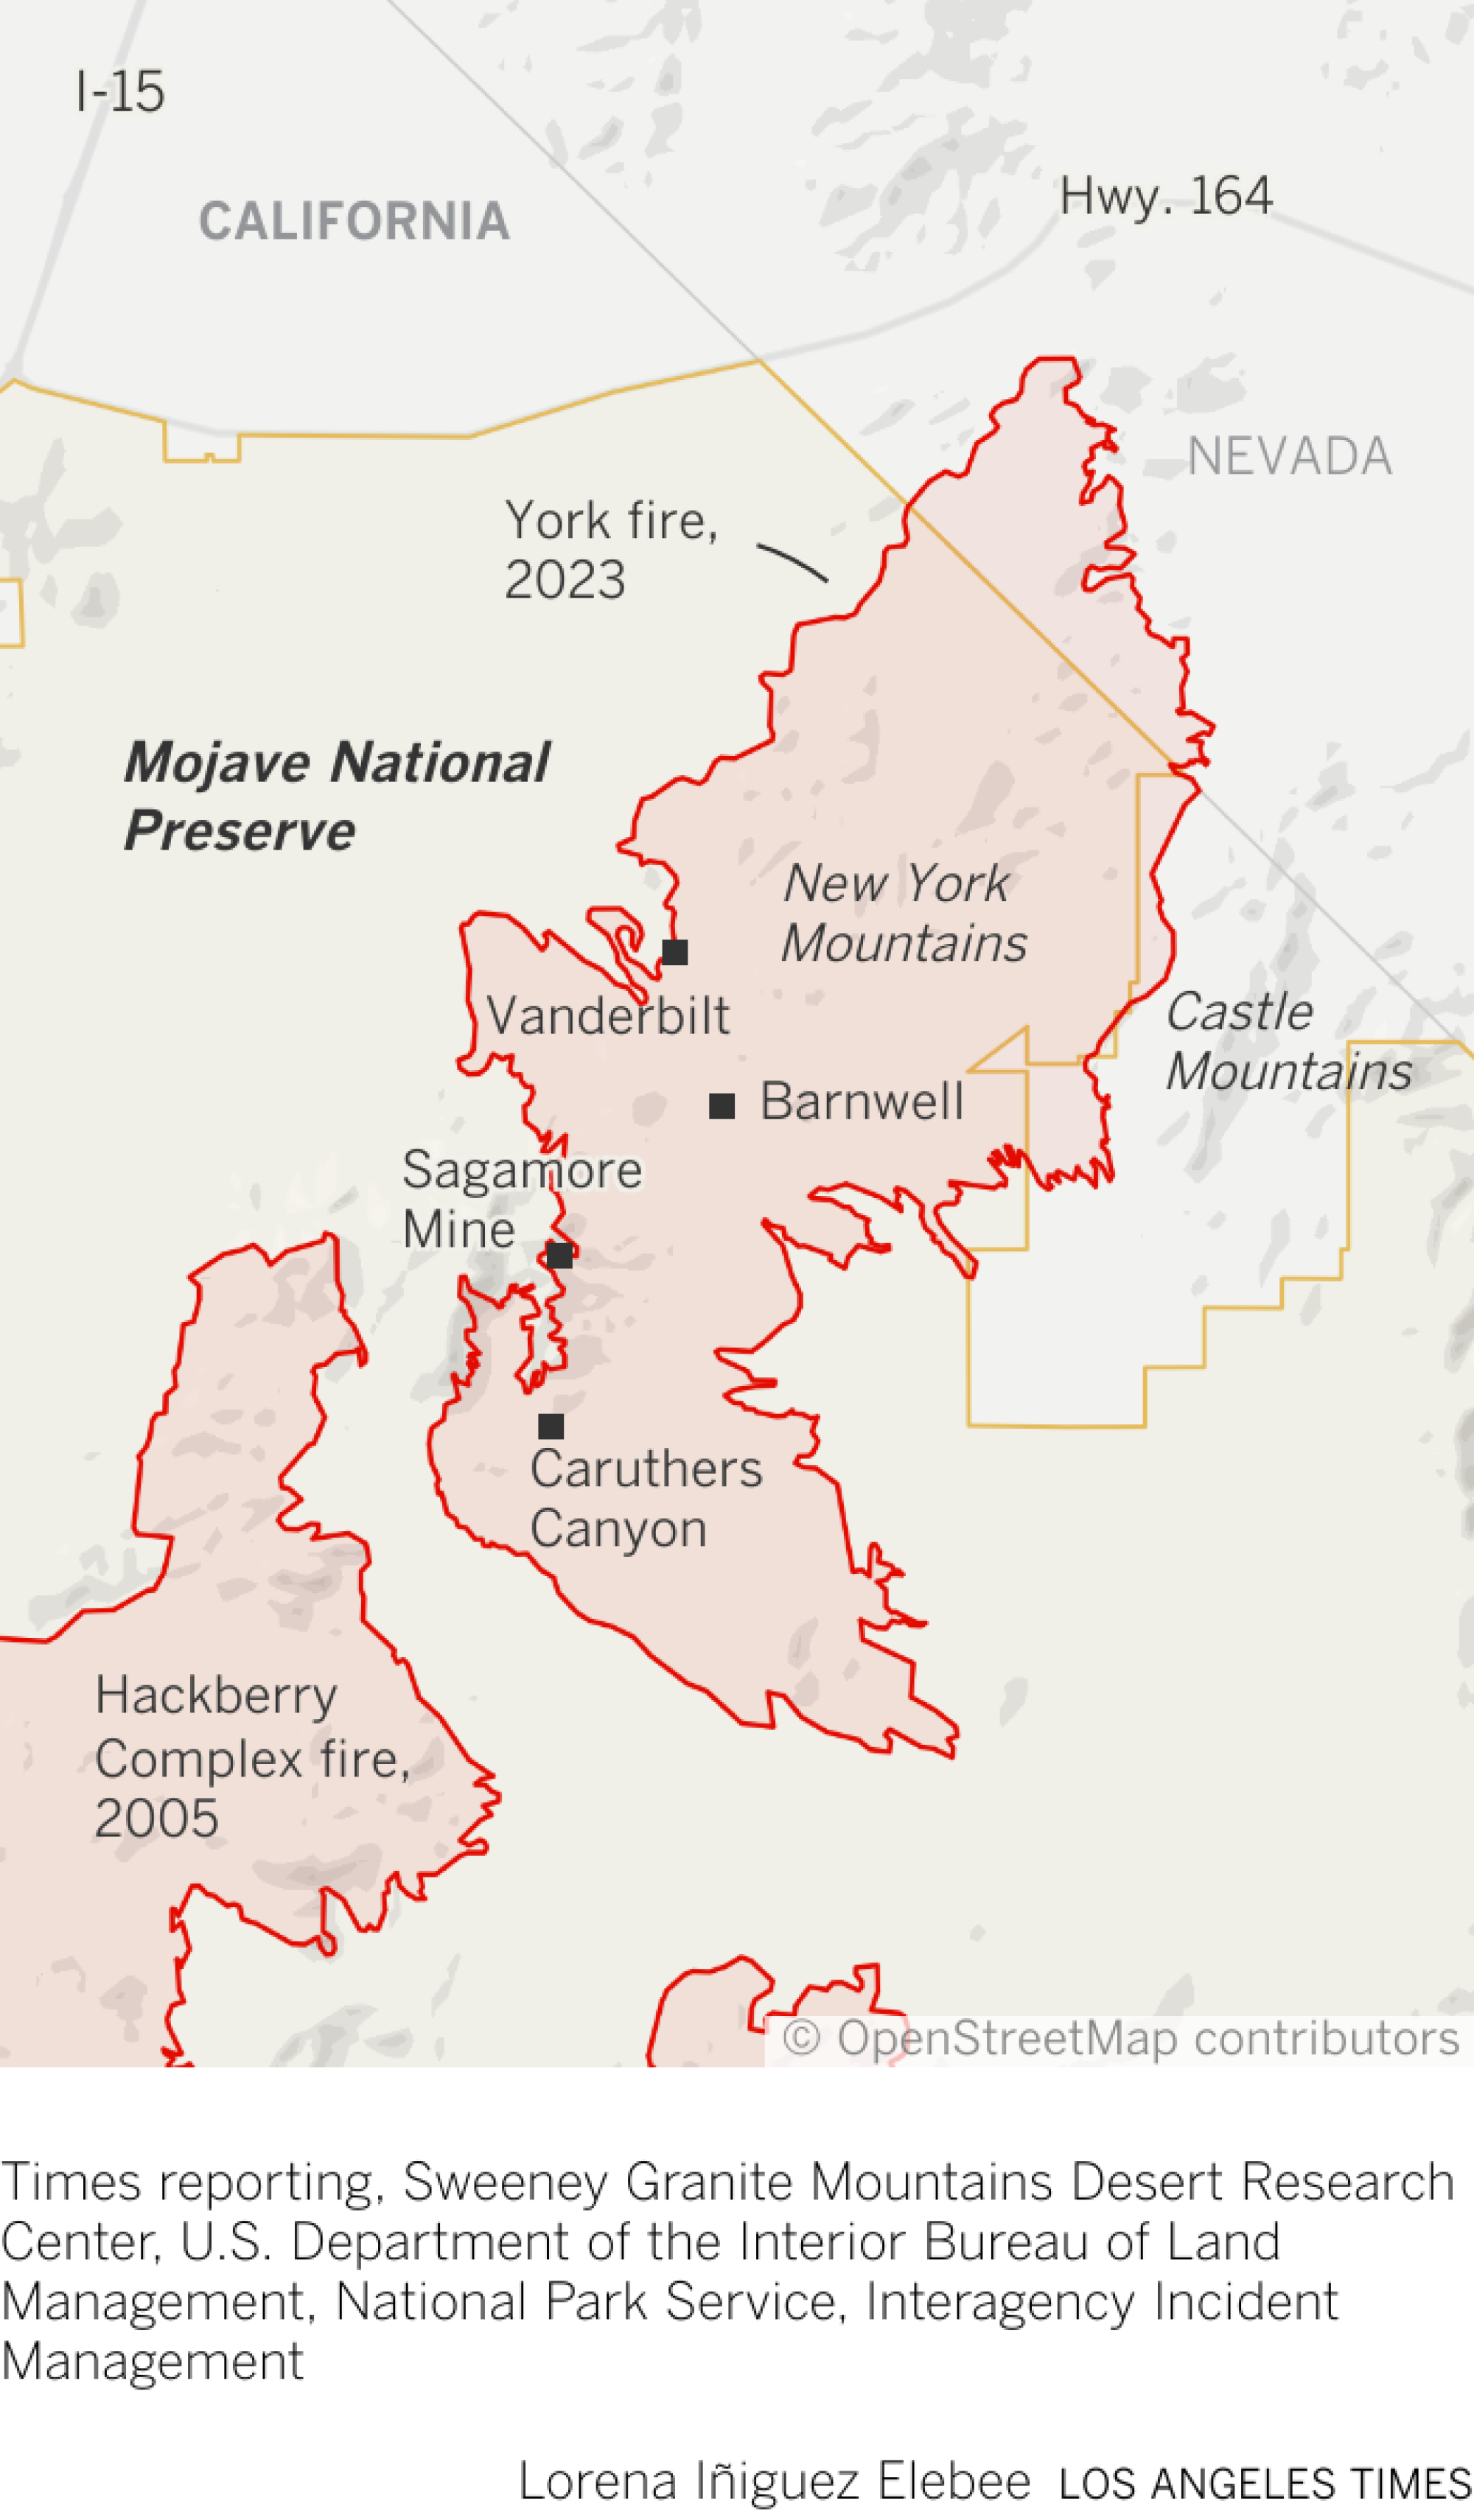 Map showing the 2023 York fire burn area within the Mojave National Preserve.